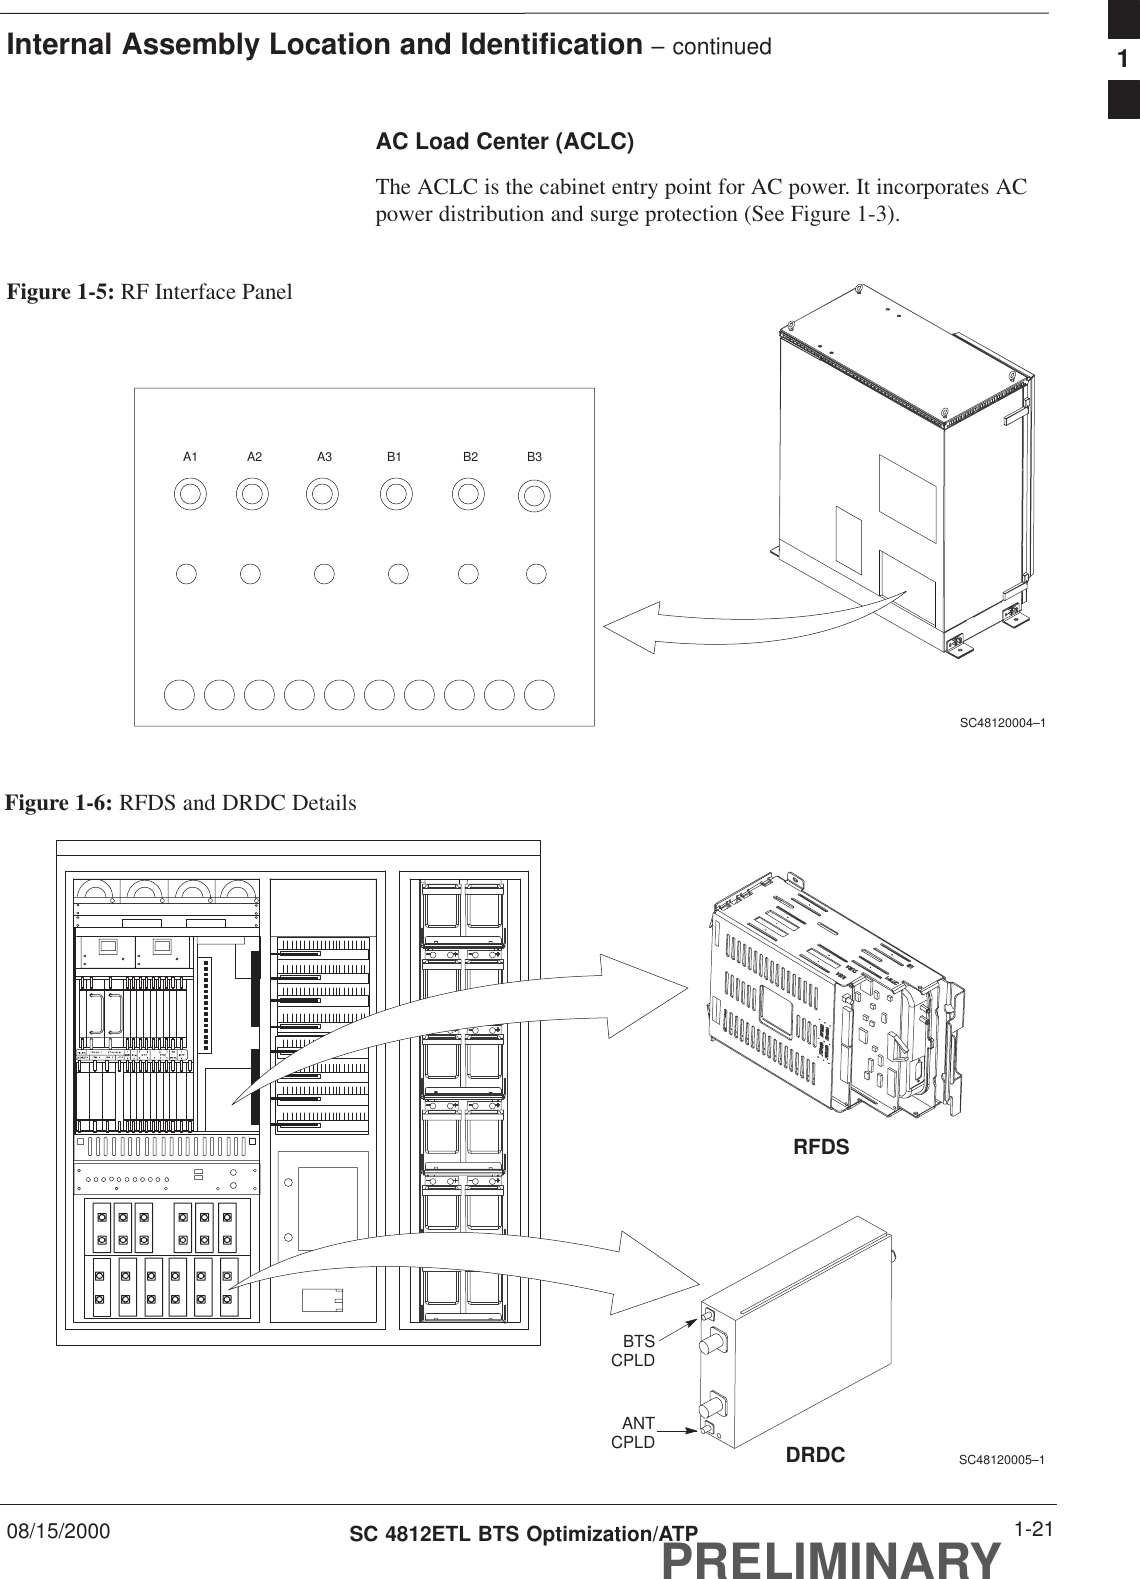 Internal Assembly Location and Identification – continued08/15/2000 1-21SC 4812ETL BTS Optimization/ATPPRELIMINARYAC Load Center (ACLC)The ACLC is the cabinet entry point for AC power. It incorporates ACpower distribution and surge protection (See Figure 1-3).Figure 1-5: RF Interface PanelA1 A2 A3 B1 B2 B3SC48120004–1Figure 1-6: RFDS and DRDC DetailsBTSCPLDANTCPLD DRDCRFDSSC48120005–11